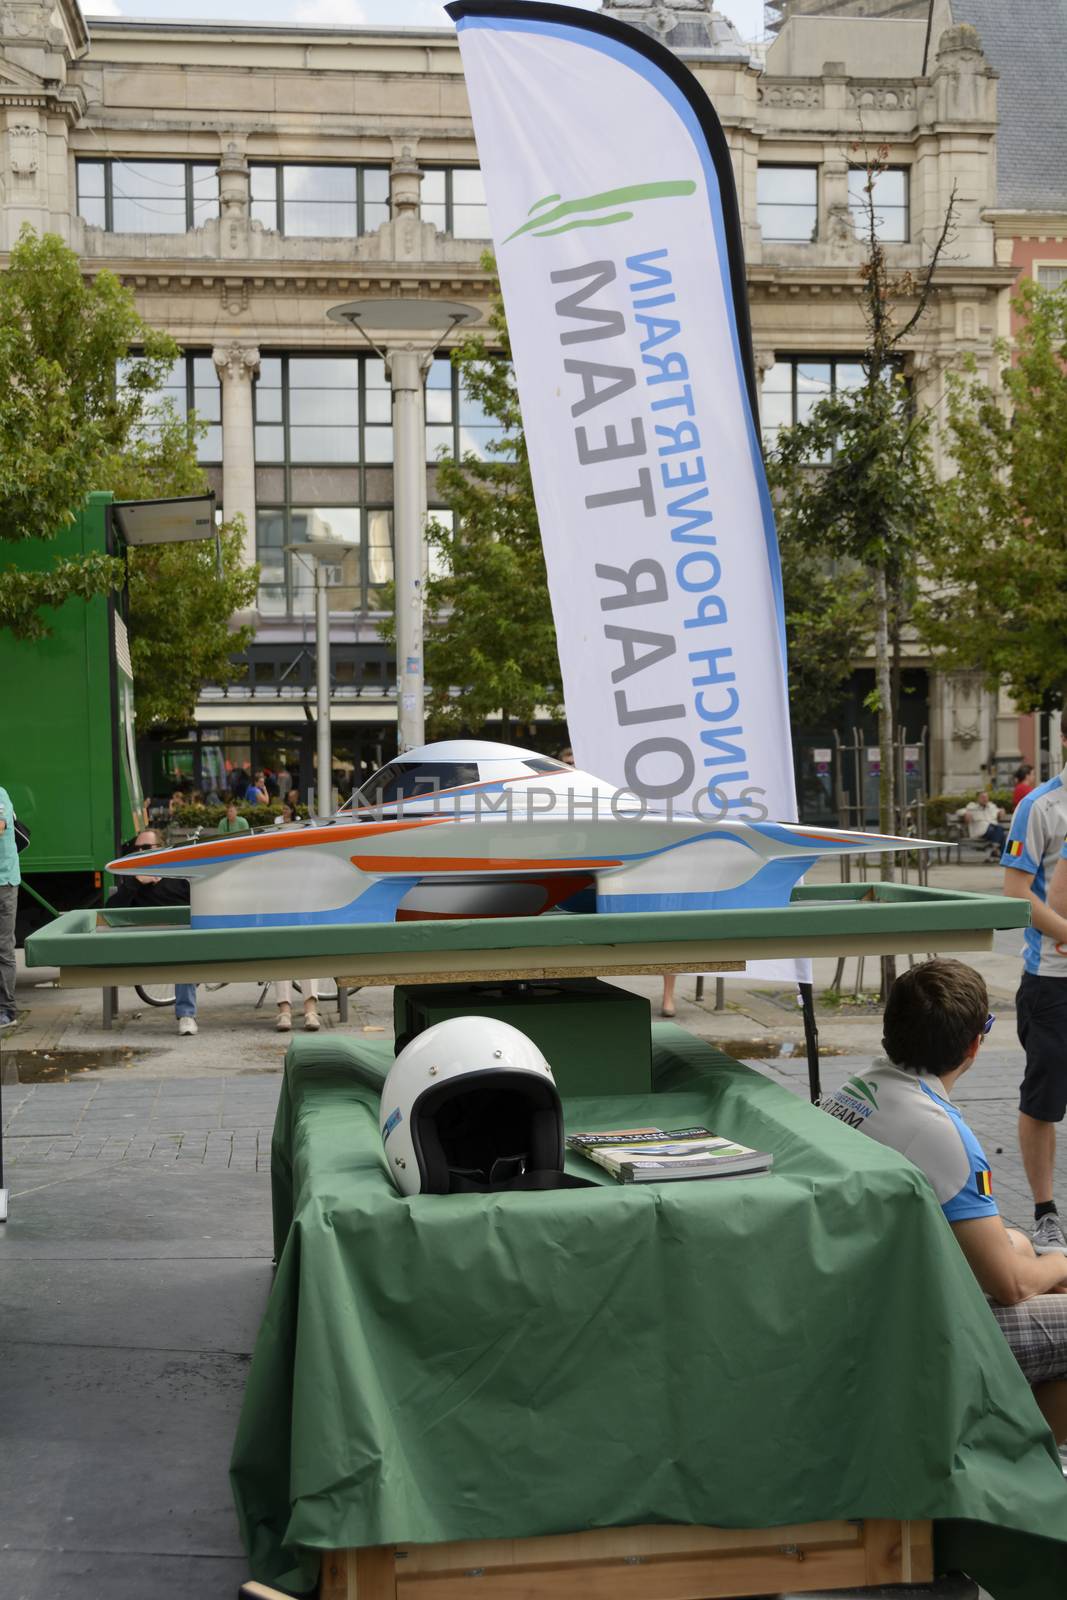 Antwerp, Belgium - August 9, 2014: The Belgian solar-powered vehicle that took part at the Antwerp exposition Solar Tour Alternative Energy for Mobility Zero Emission. On August 9, 2014. Belgium.